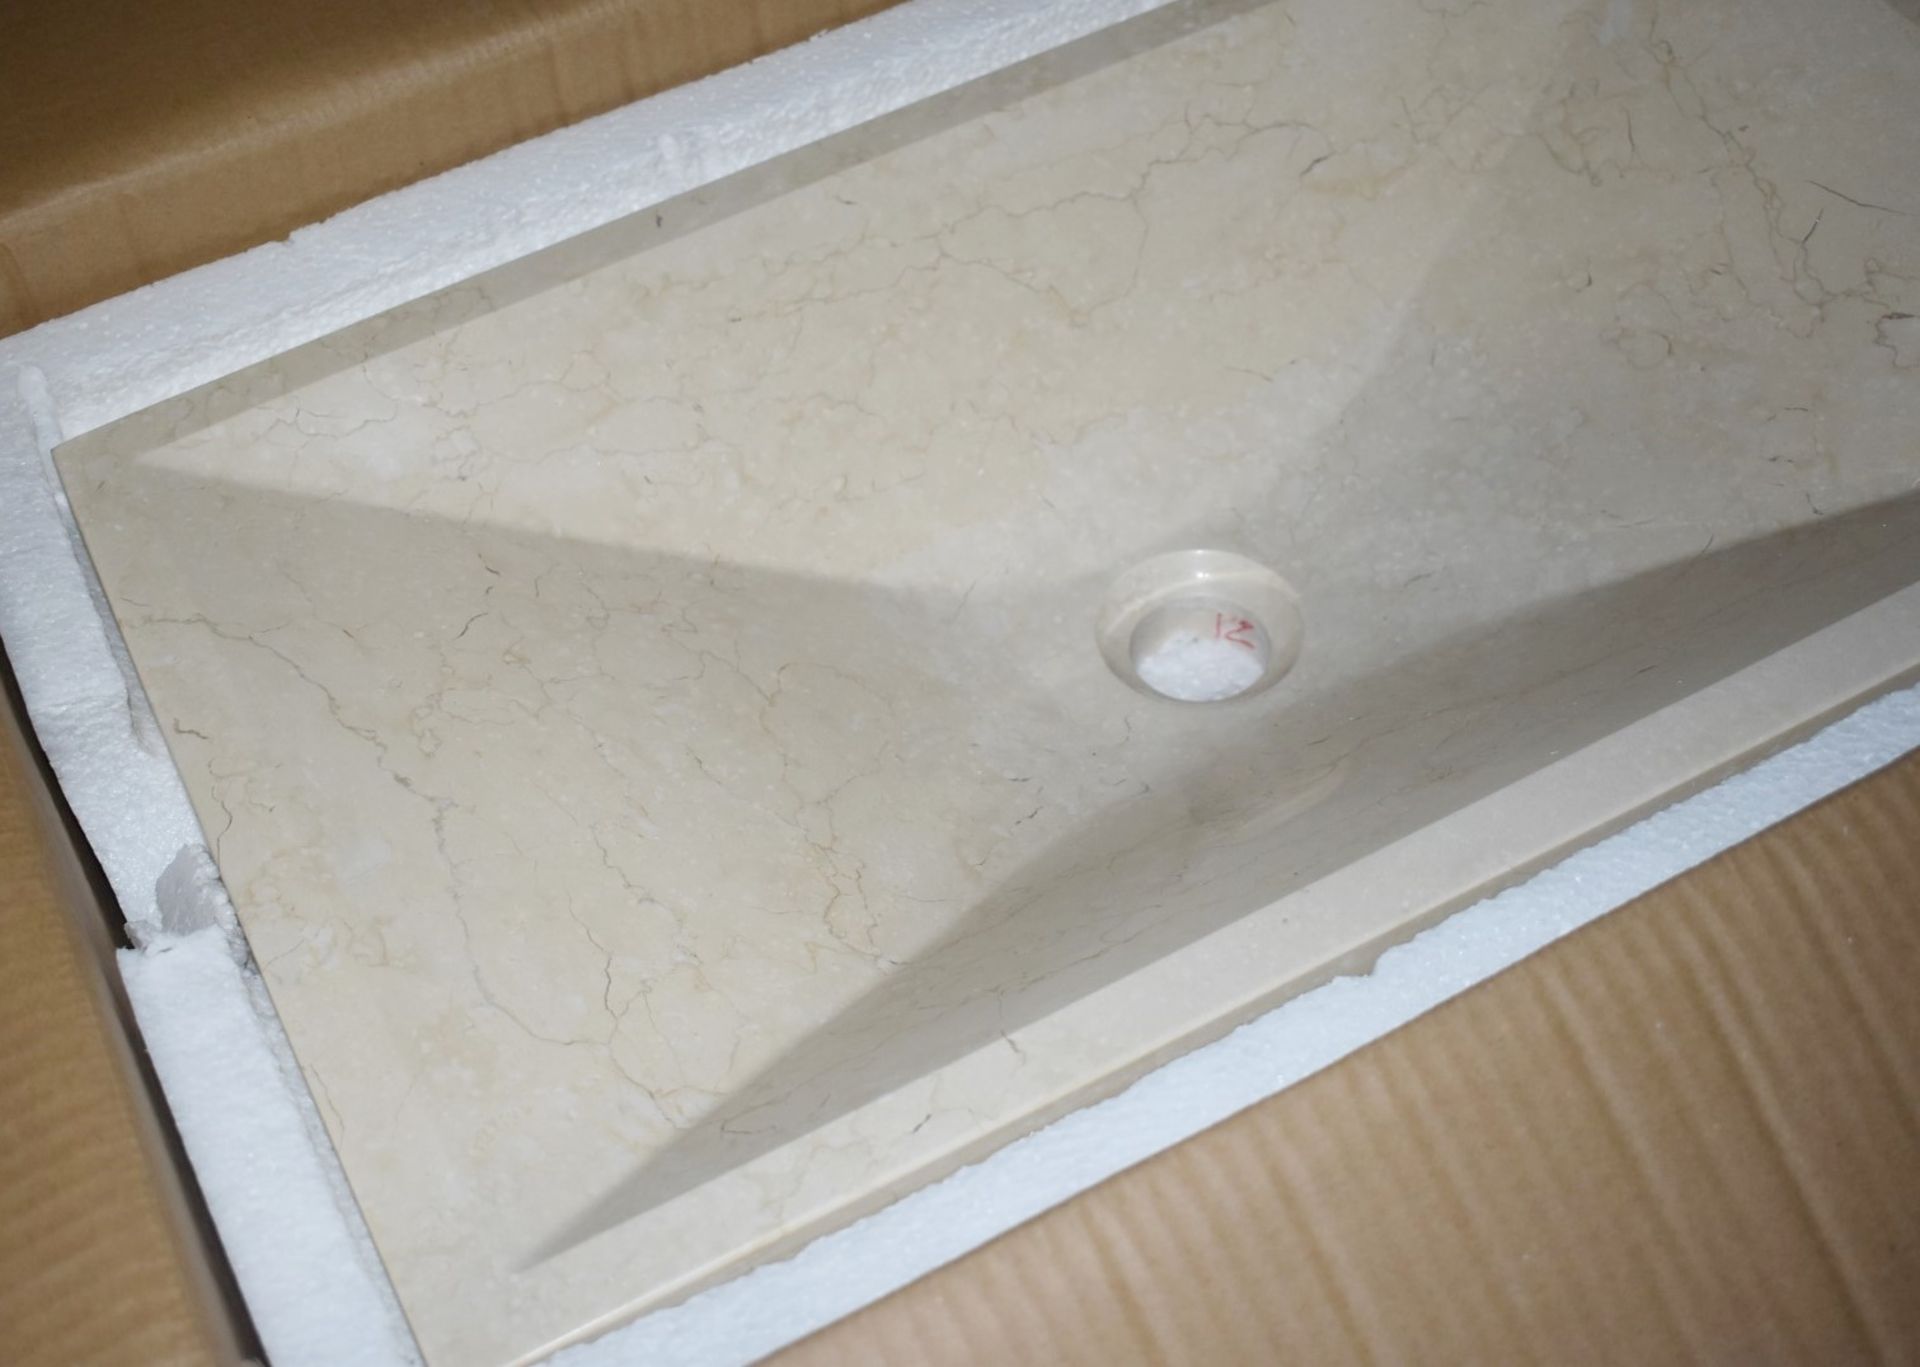 1 x Stonearth 'Karo' Solid Travertine Stone Countertop Sink Basin - New Boxed Stock - RRP £525 - - Image 5 of 8